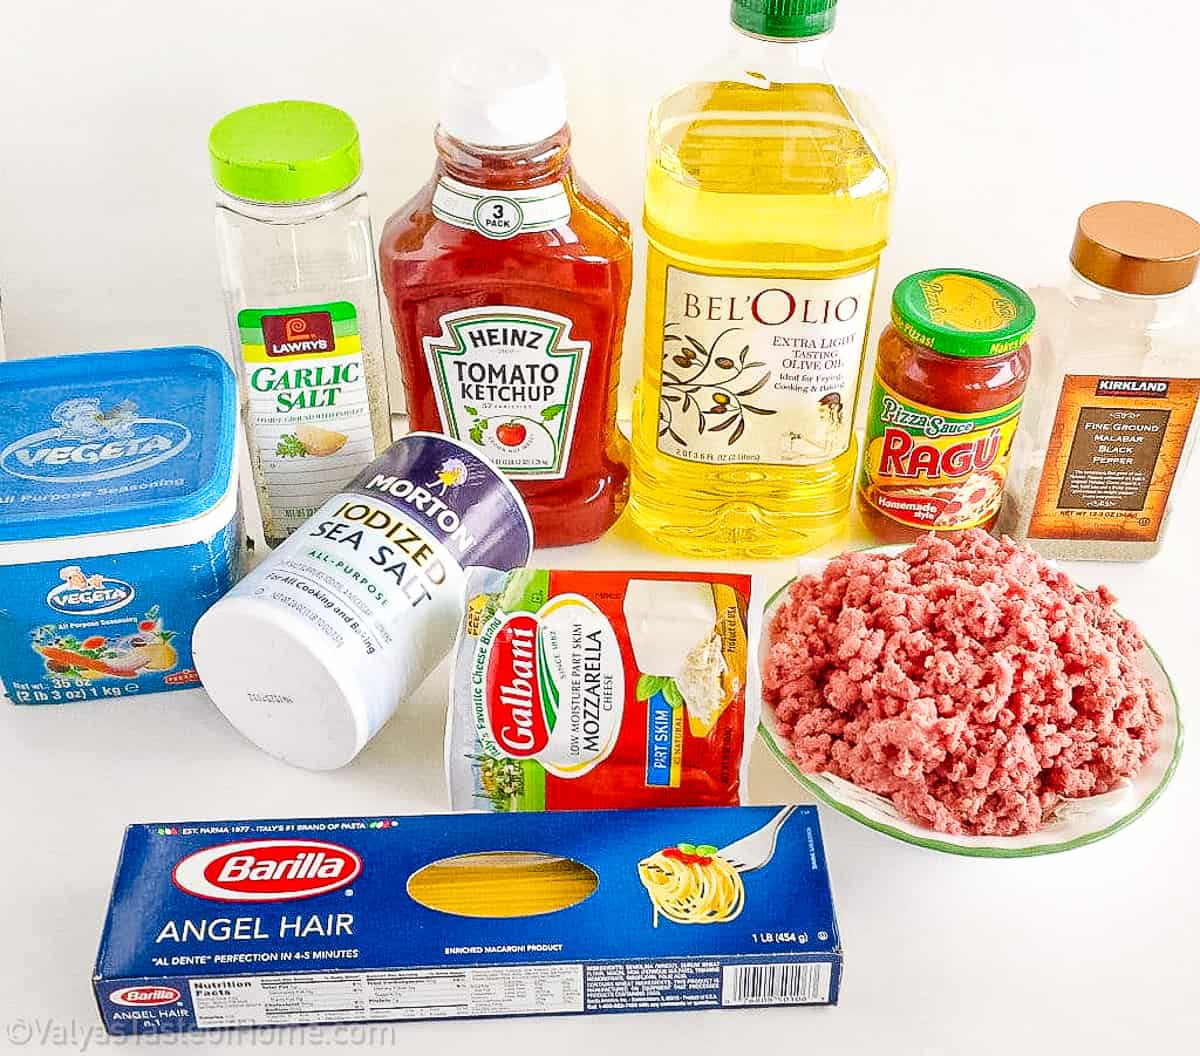 All you need are some simple pantry staple ingredients to make this spaghetti meat sauce recipe at home.